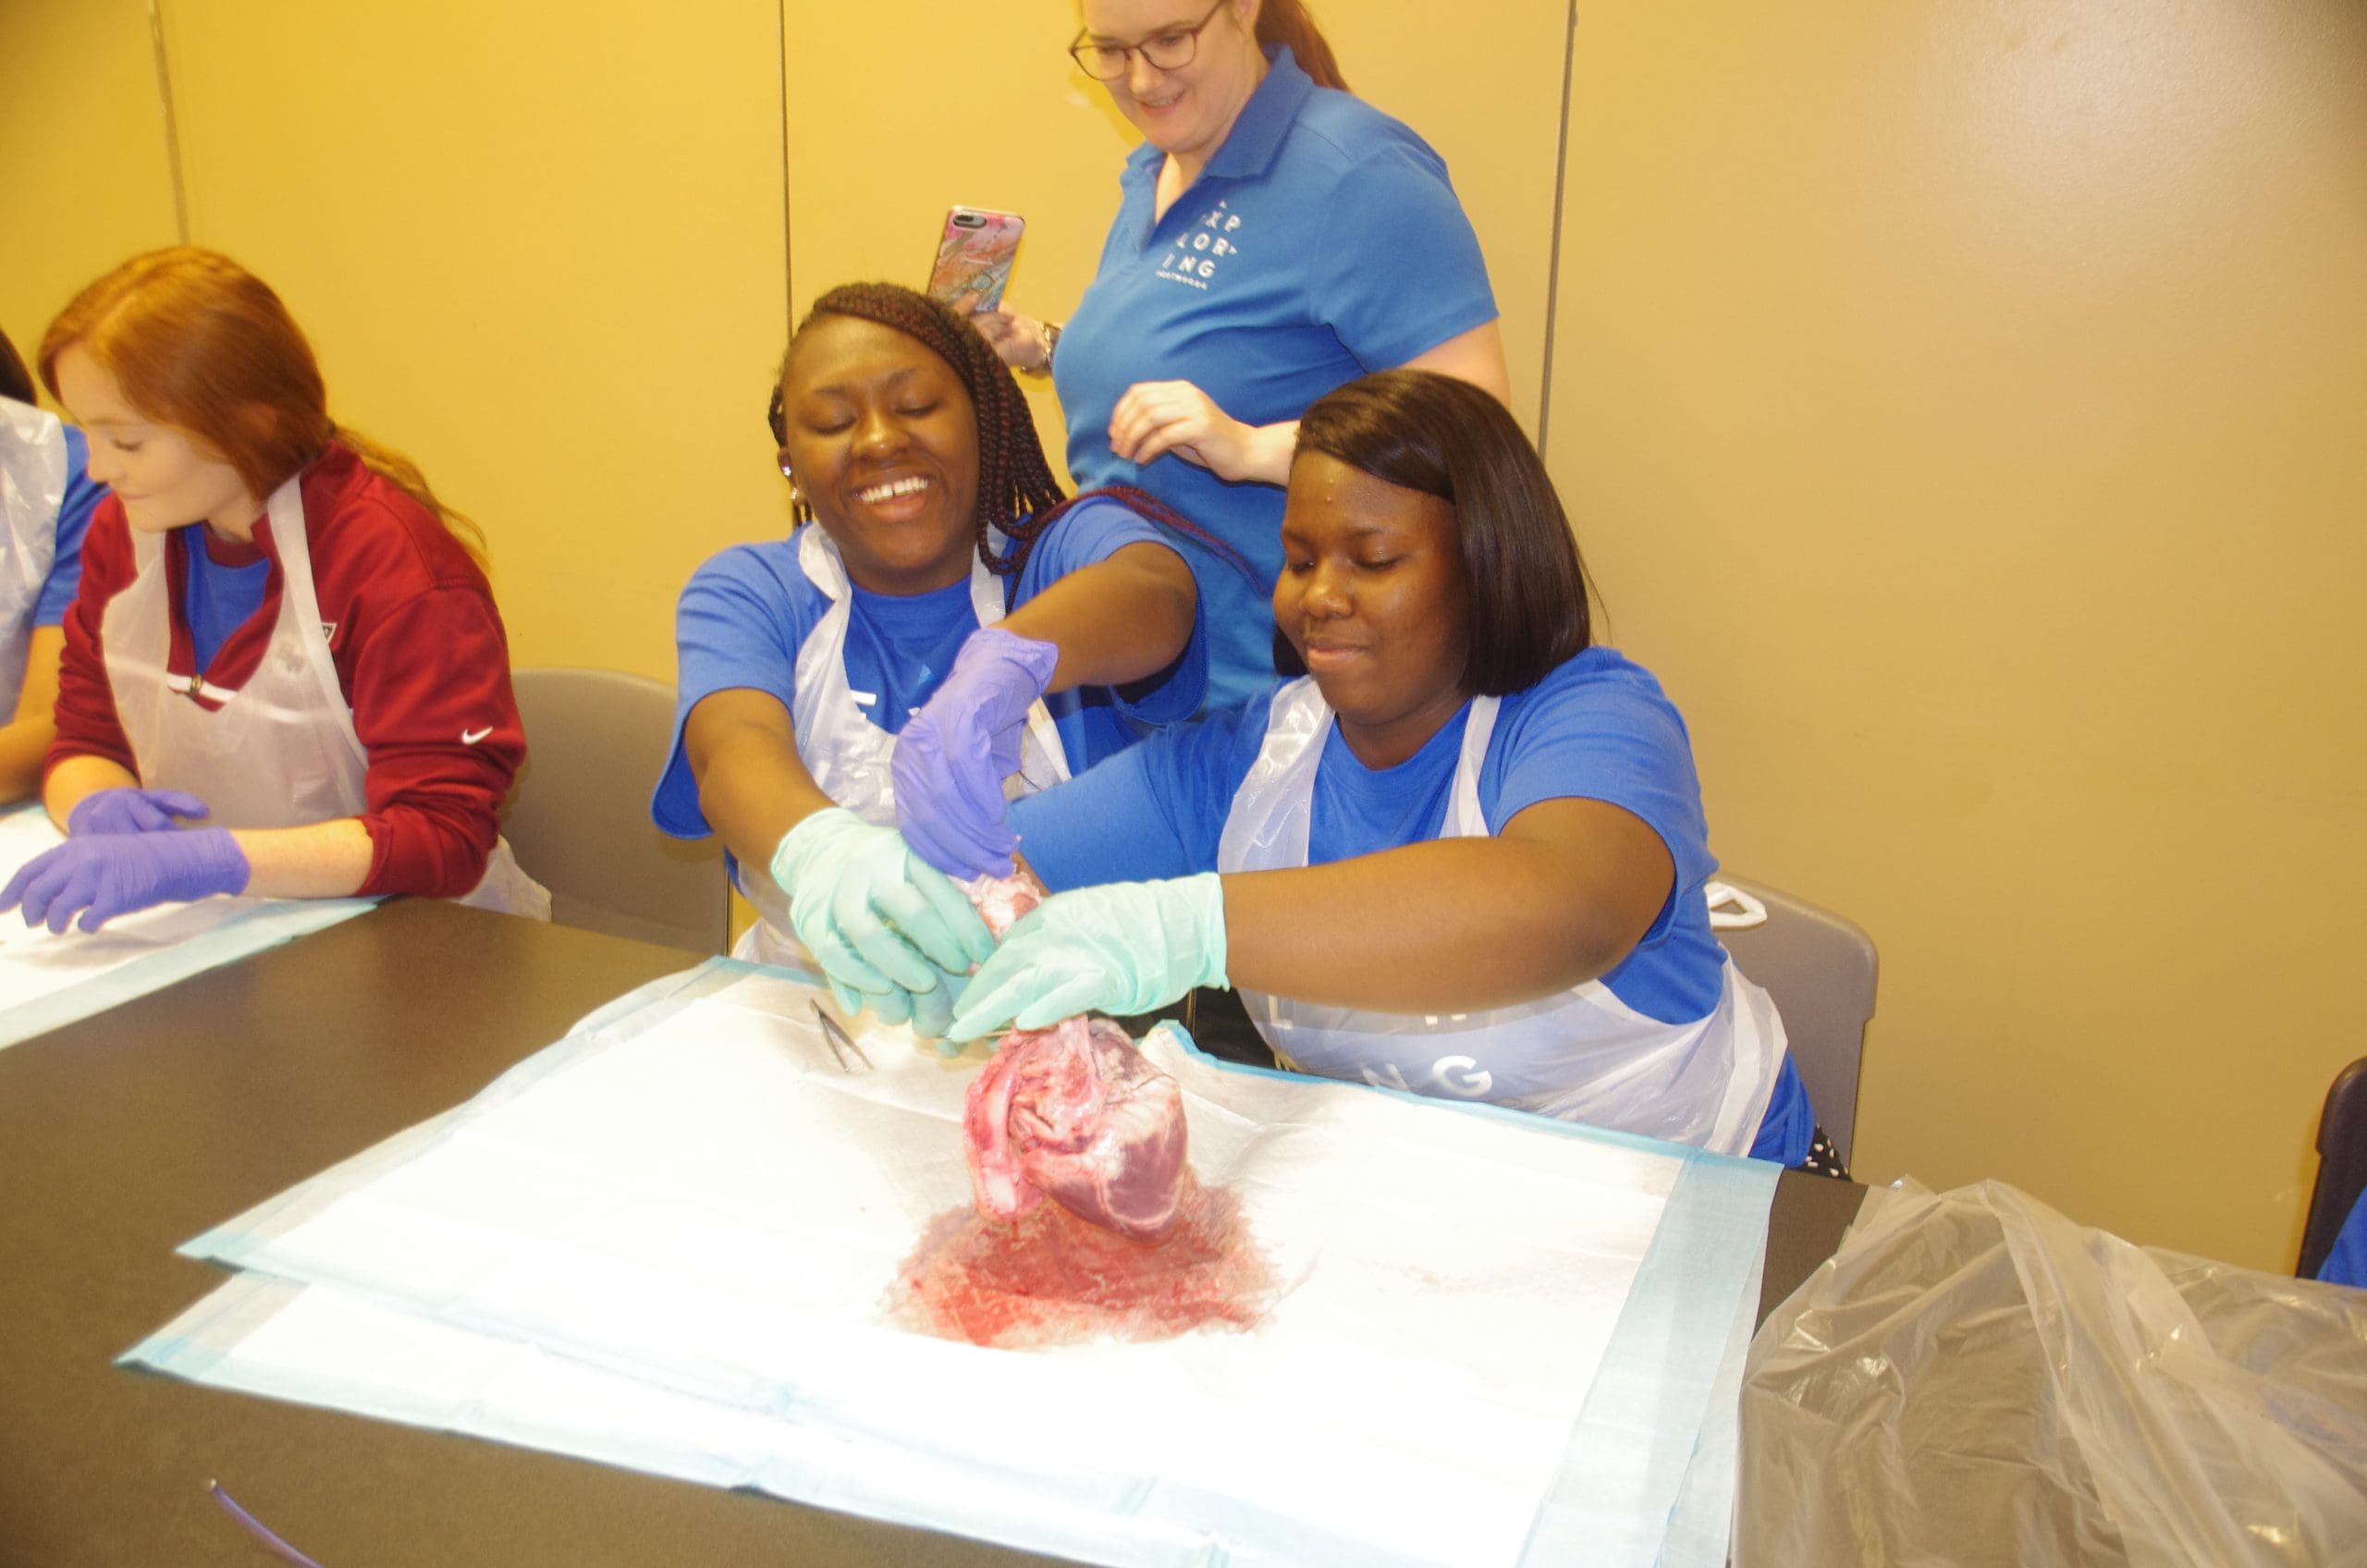 Community Outreach by Nursing Professionals